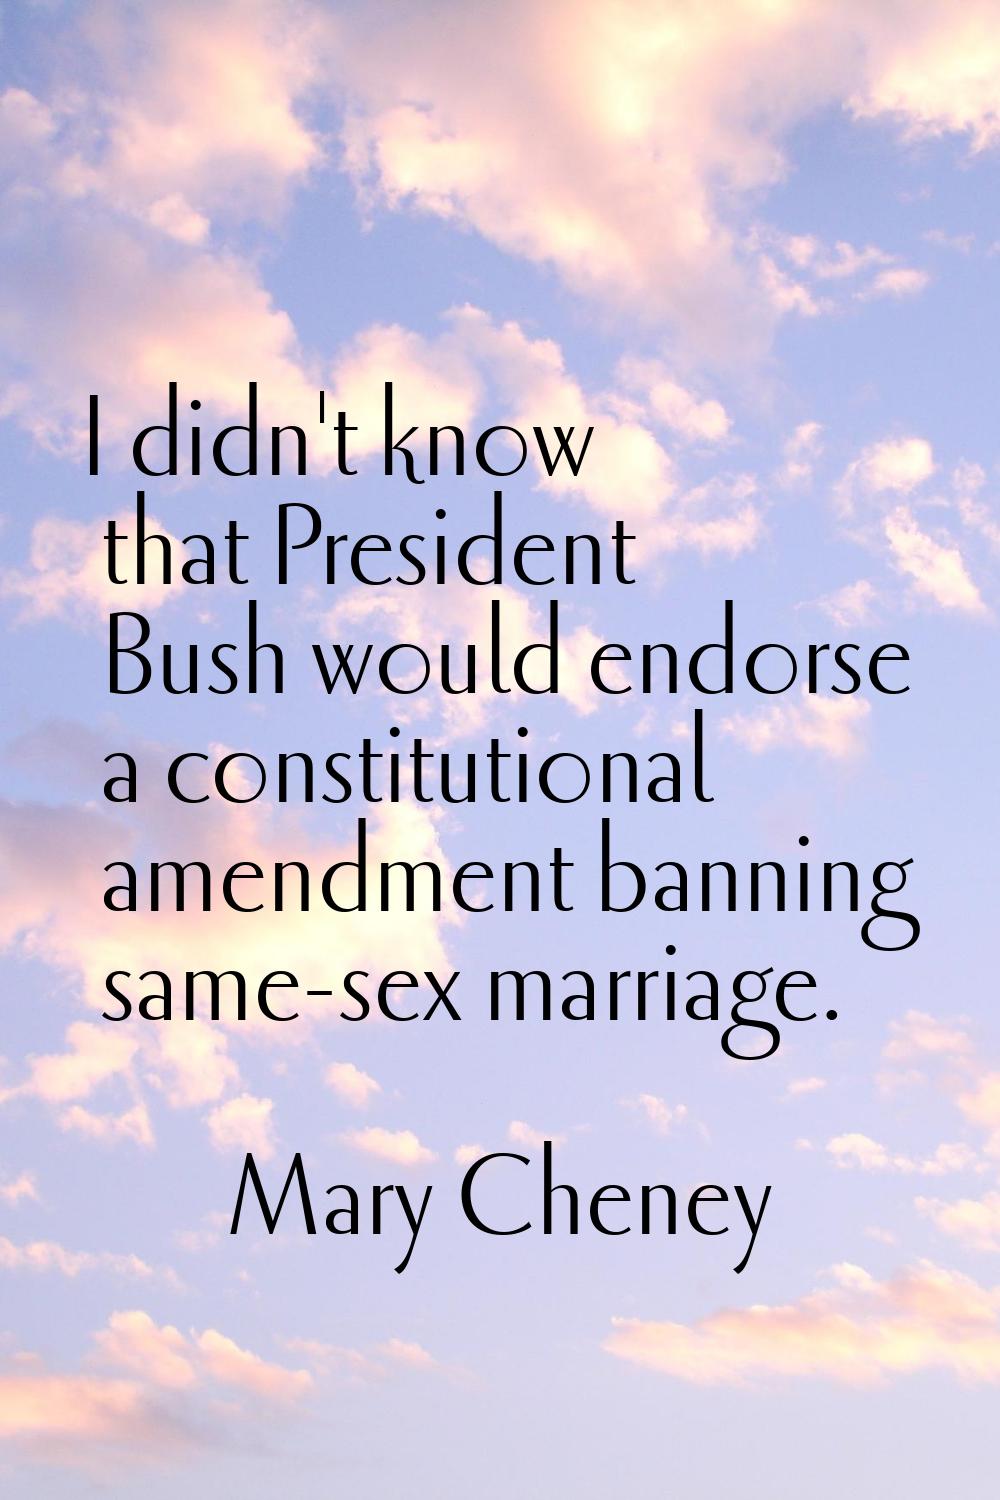 I didn't know that President Bush would endorse a constitutional amendment banning same-sex marriag